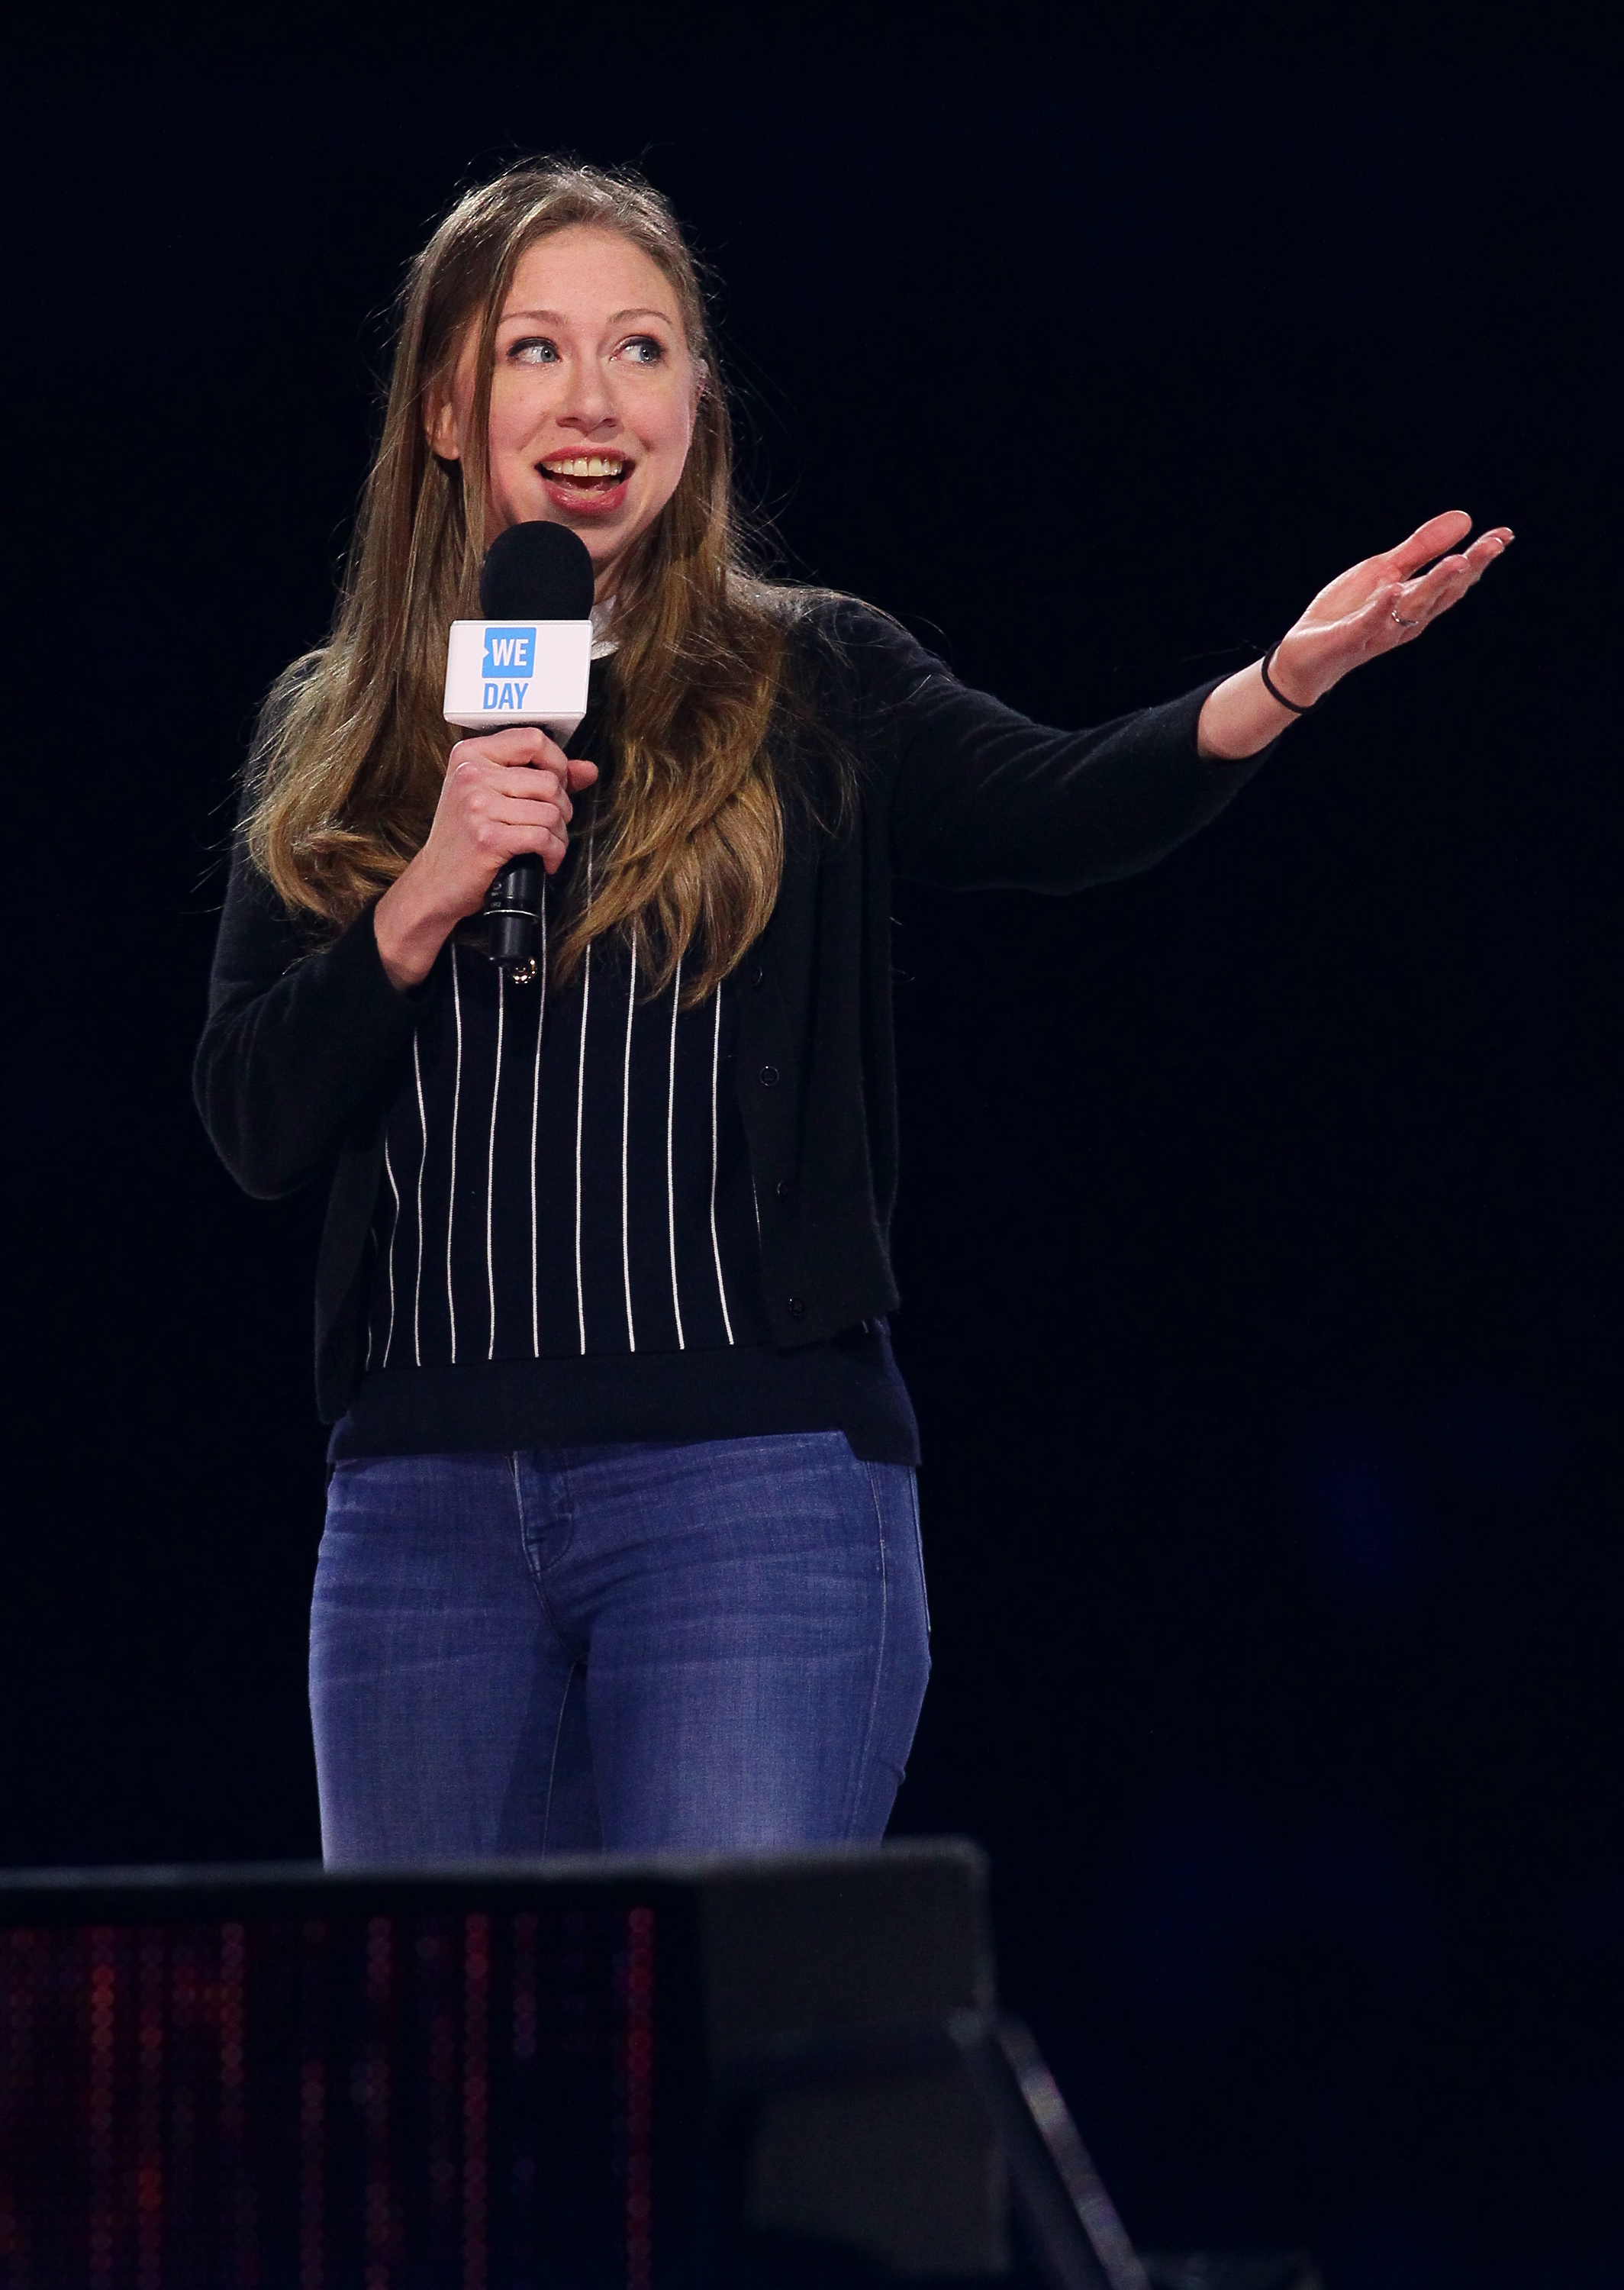 Ciara, Darren Criss, Chelsea Clinton, Lily Collins, Rowan Blanchard, Nico &amp; Vinz, Natalie La Rose And More Come Together At WE Day Minnesota to Celebrate The Power Young People Have To Change The World